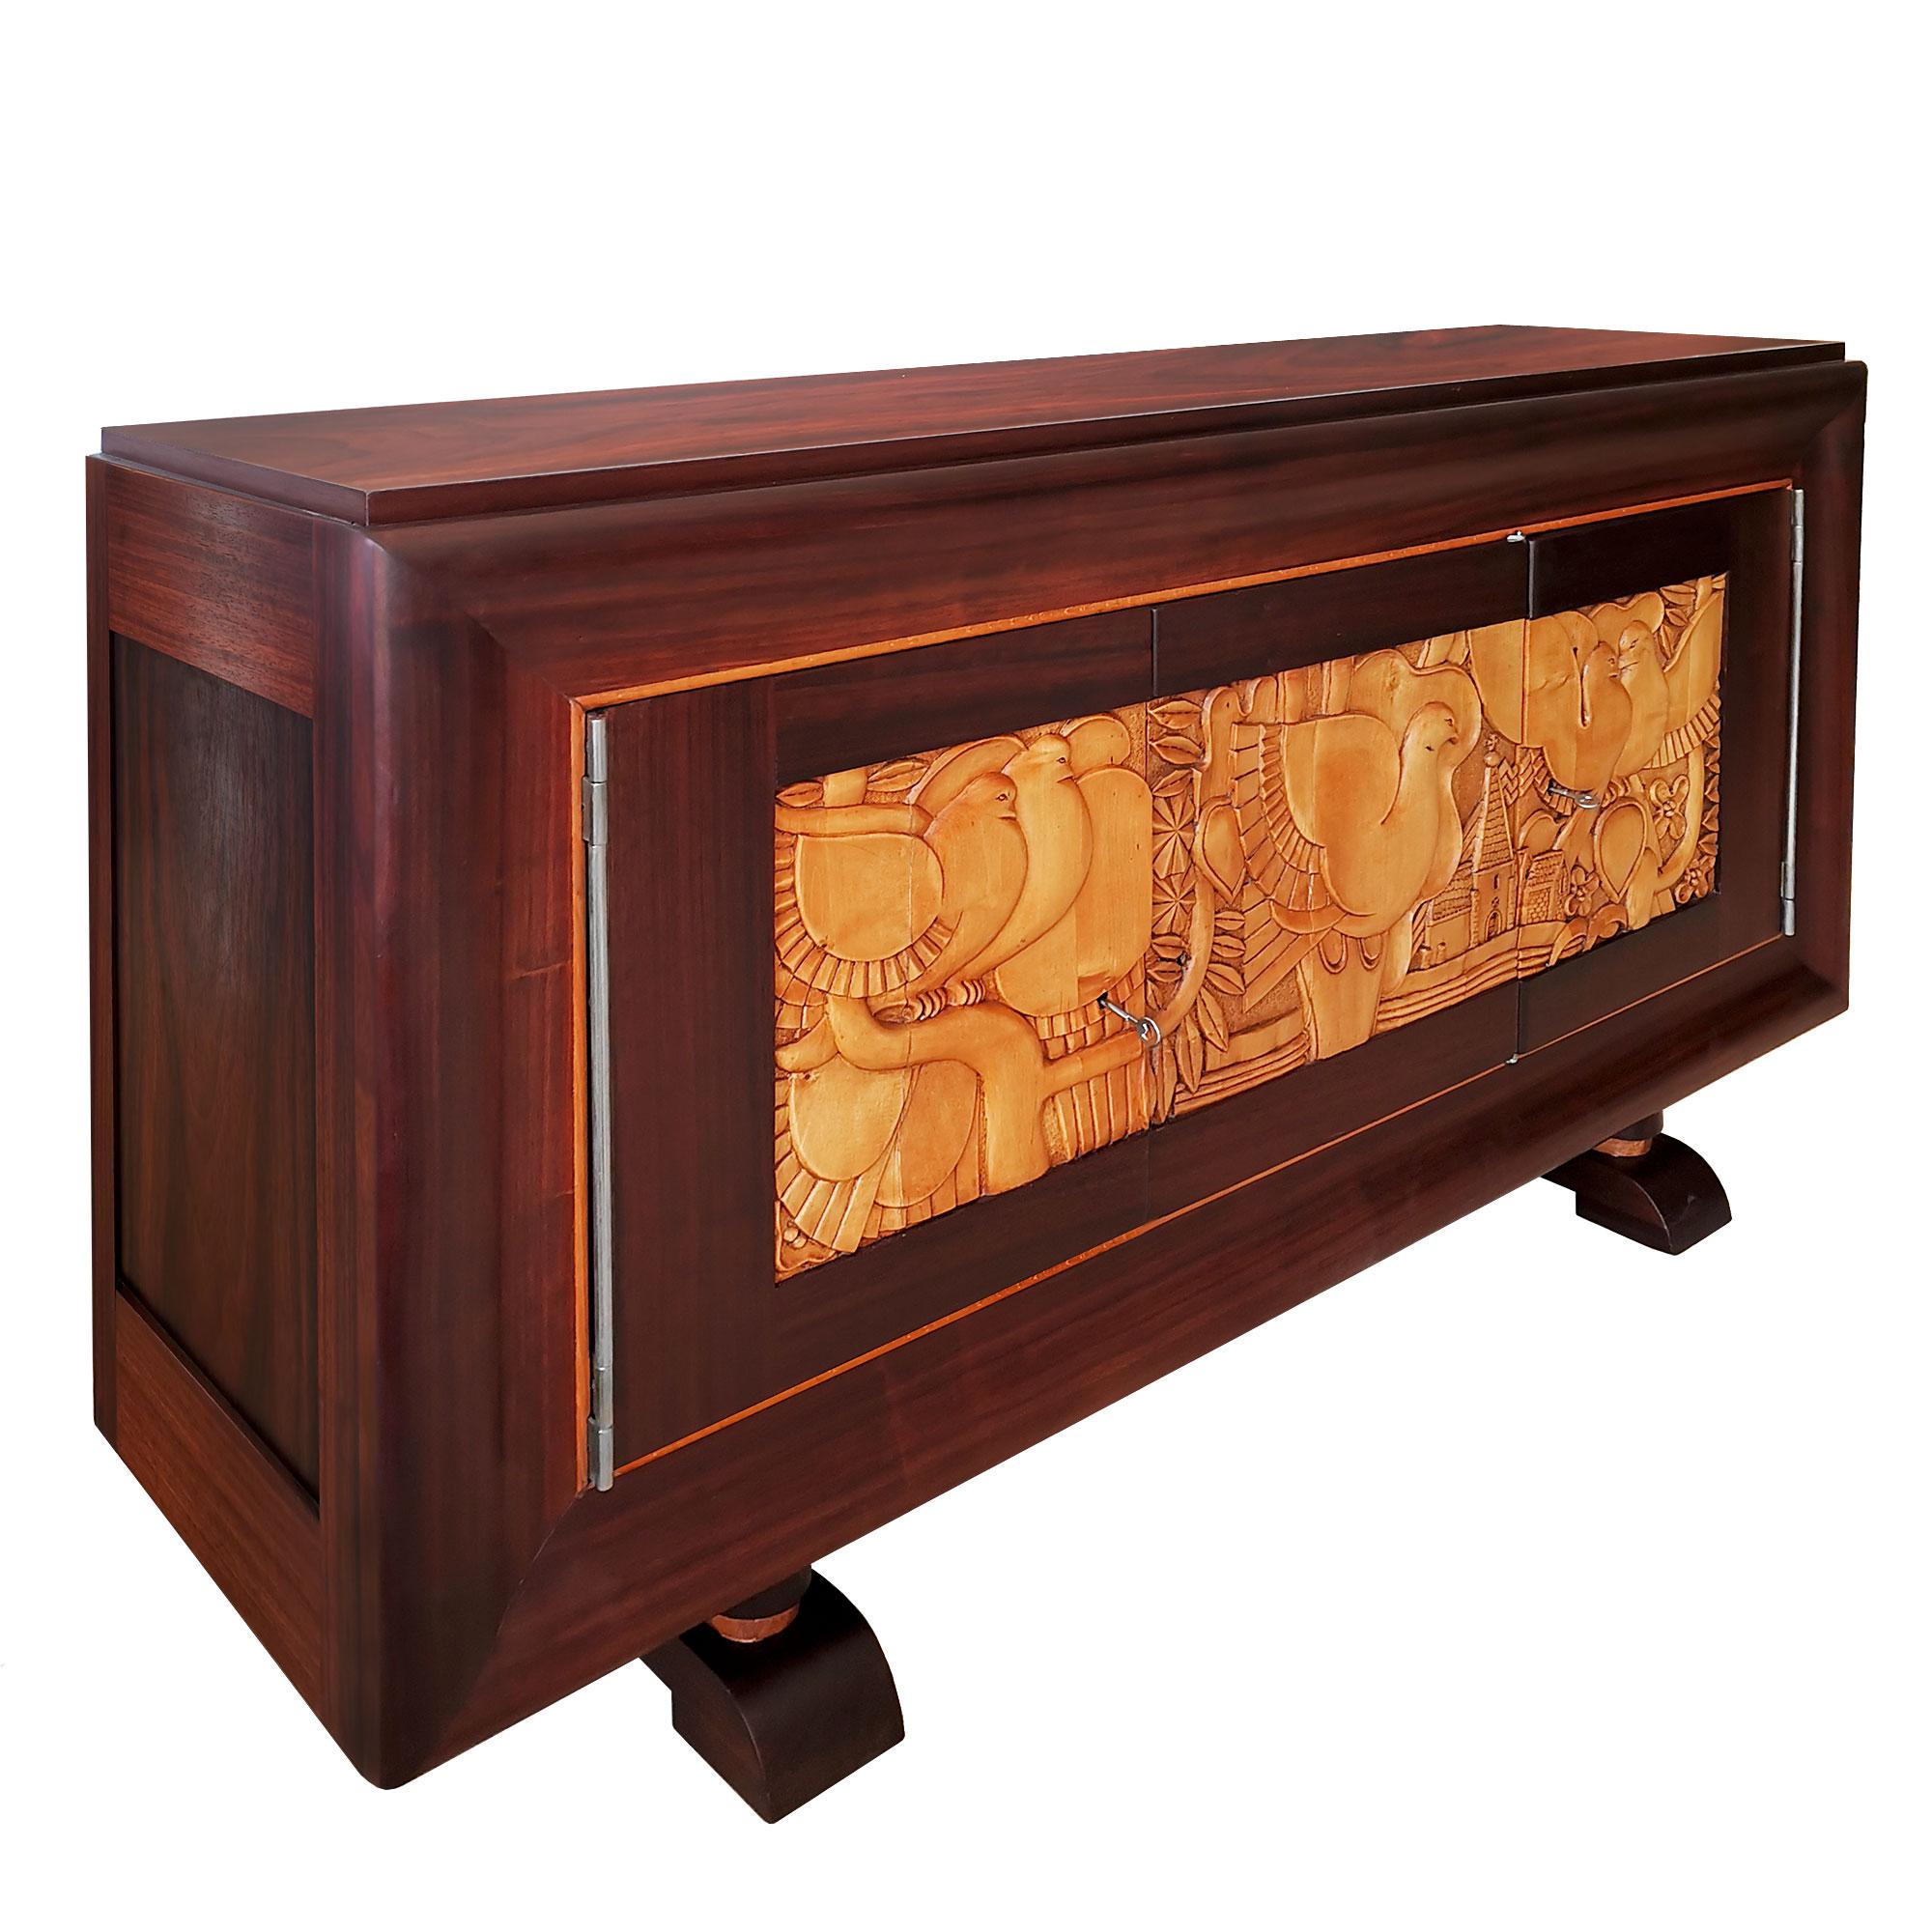 Sideboard with three doors, solid bubinga wood with bubinga veneer. Doors decoration in carved maple with doves, church tower and vegetal patterns. Bubinga shelves on the sides and maple shelf in the middle. Nickel plated bronze hinges. Shellac and